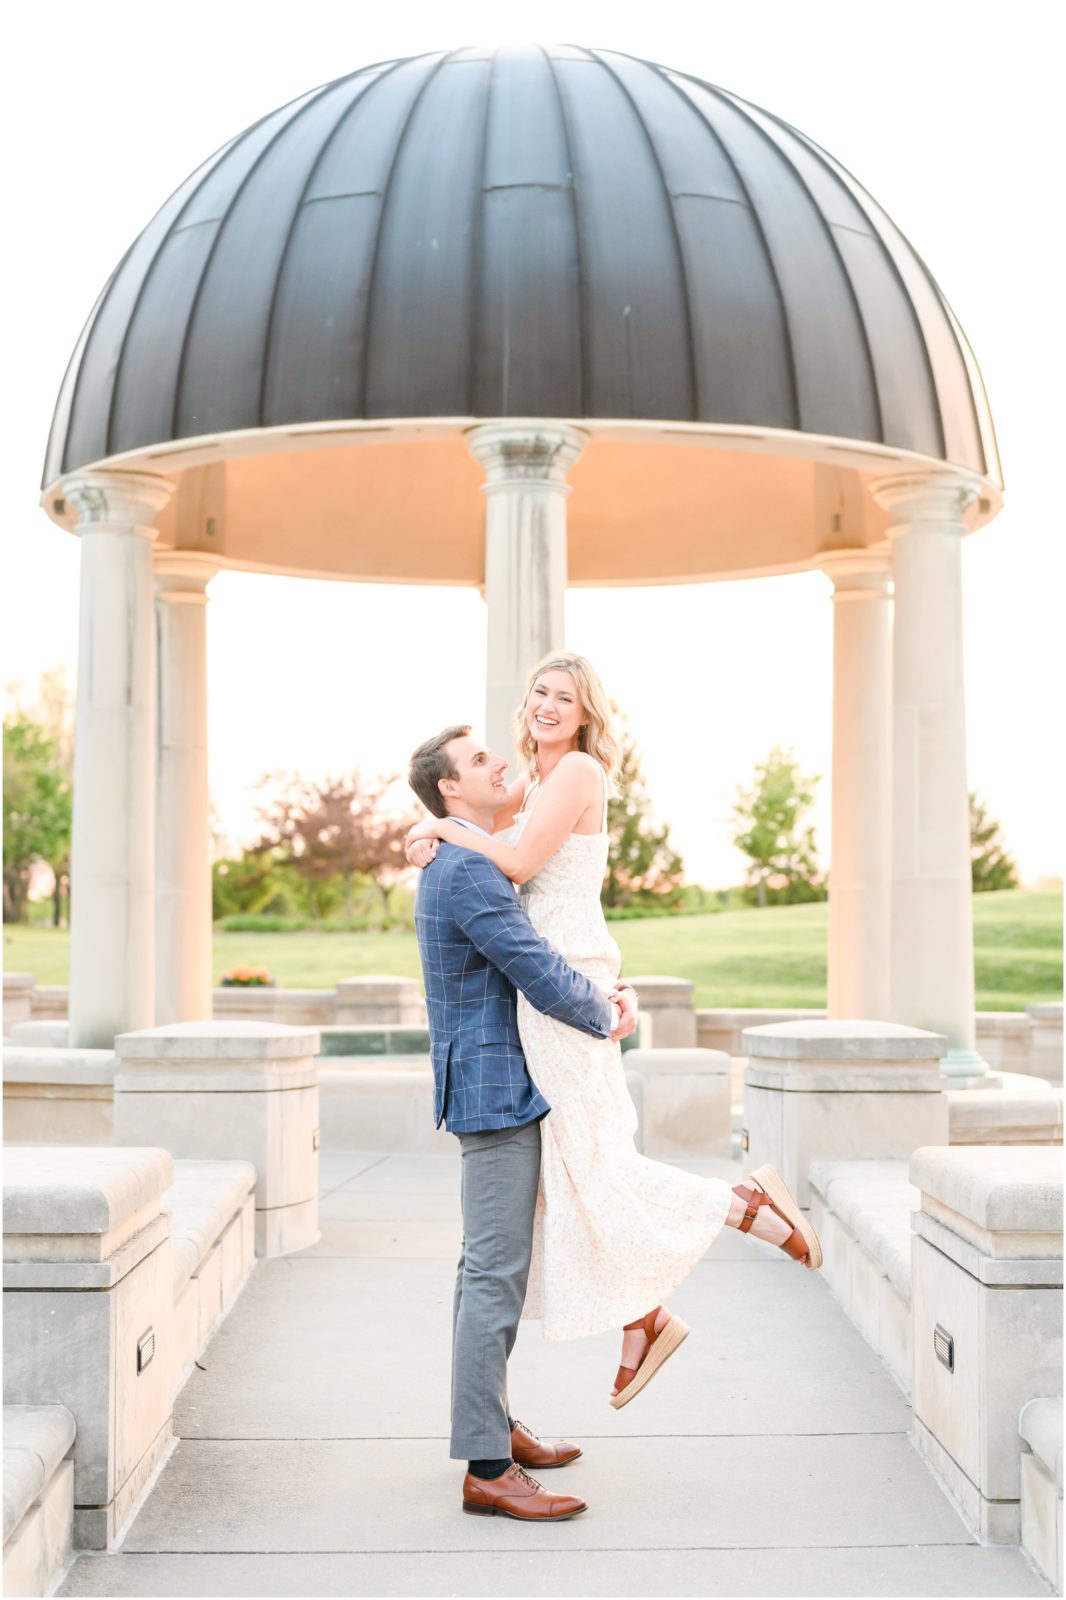 Lift kiss Coxhall Gardens Engagement Session